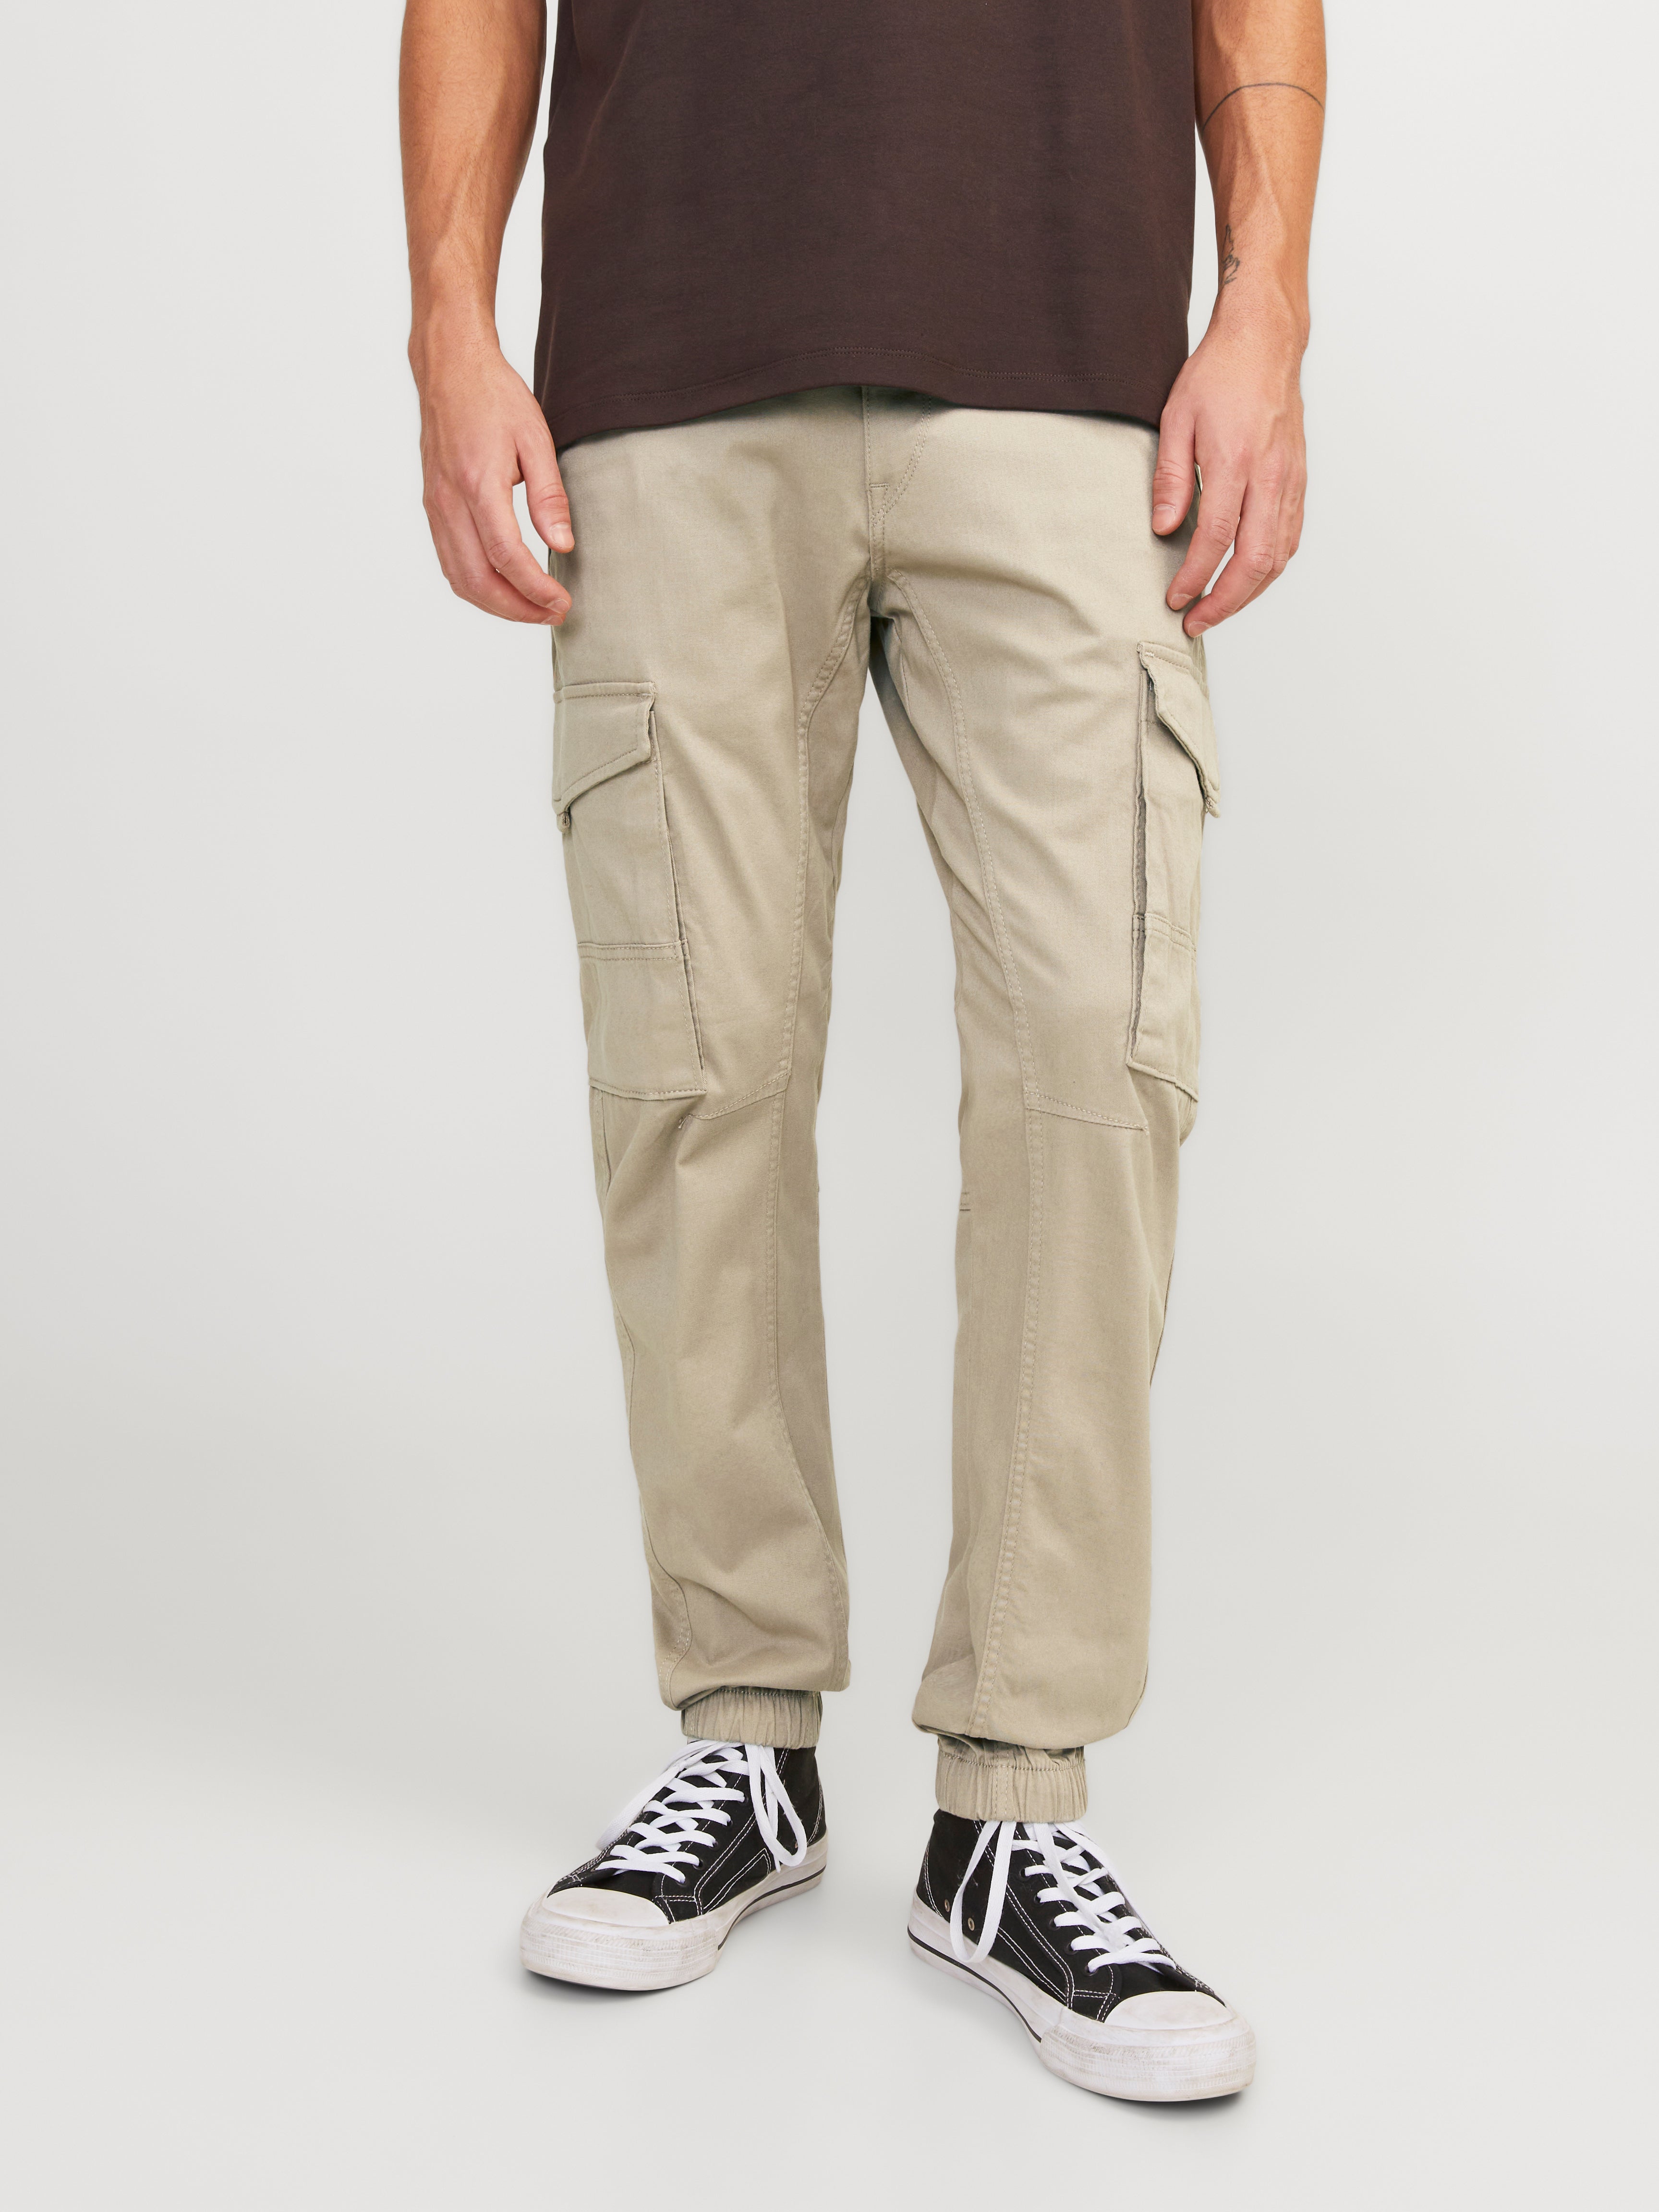 Classic Cargo Pants-Swerve-These high quality classic Cargo Pants are